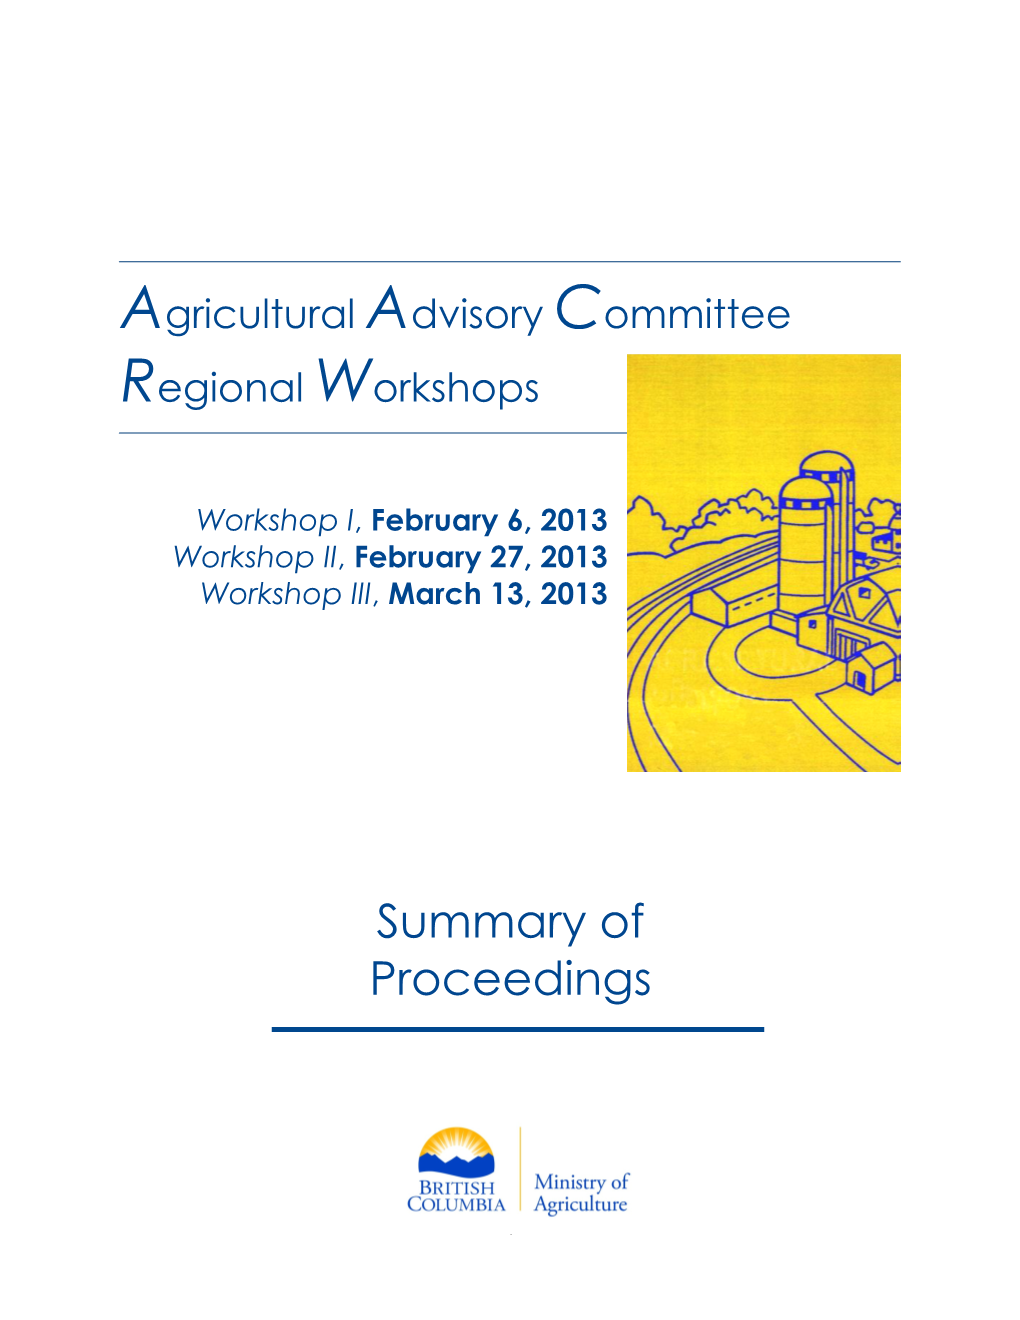 Agricultural Advisory Committee Regional Workshops